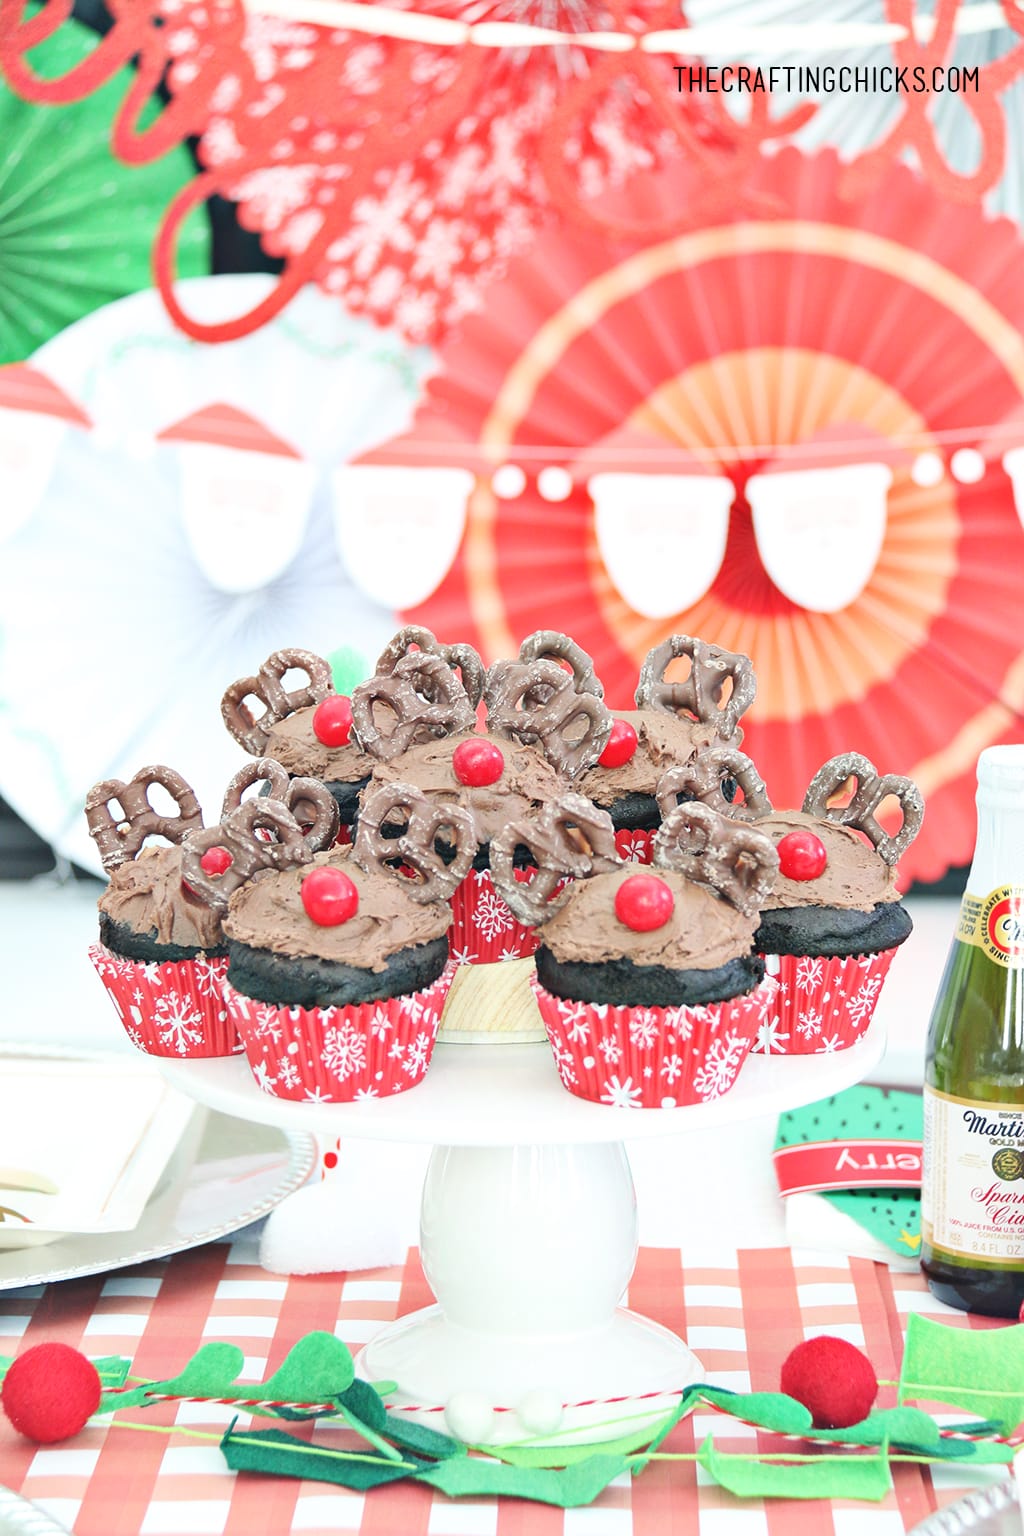 Reindeer cupcakes on decorated party table with red and green paper fan background.